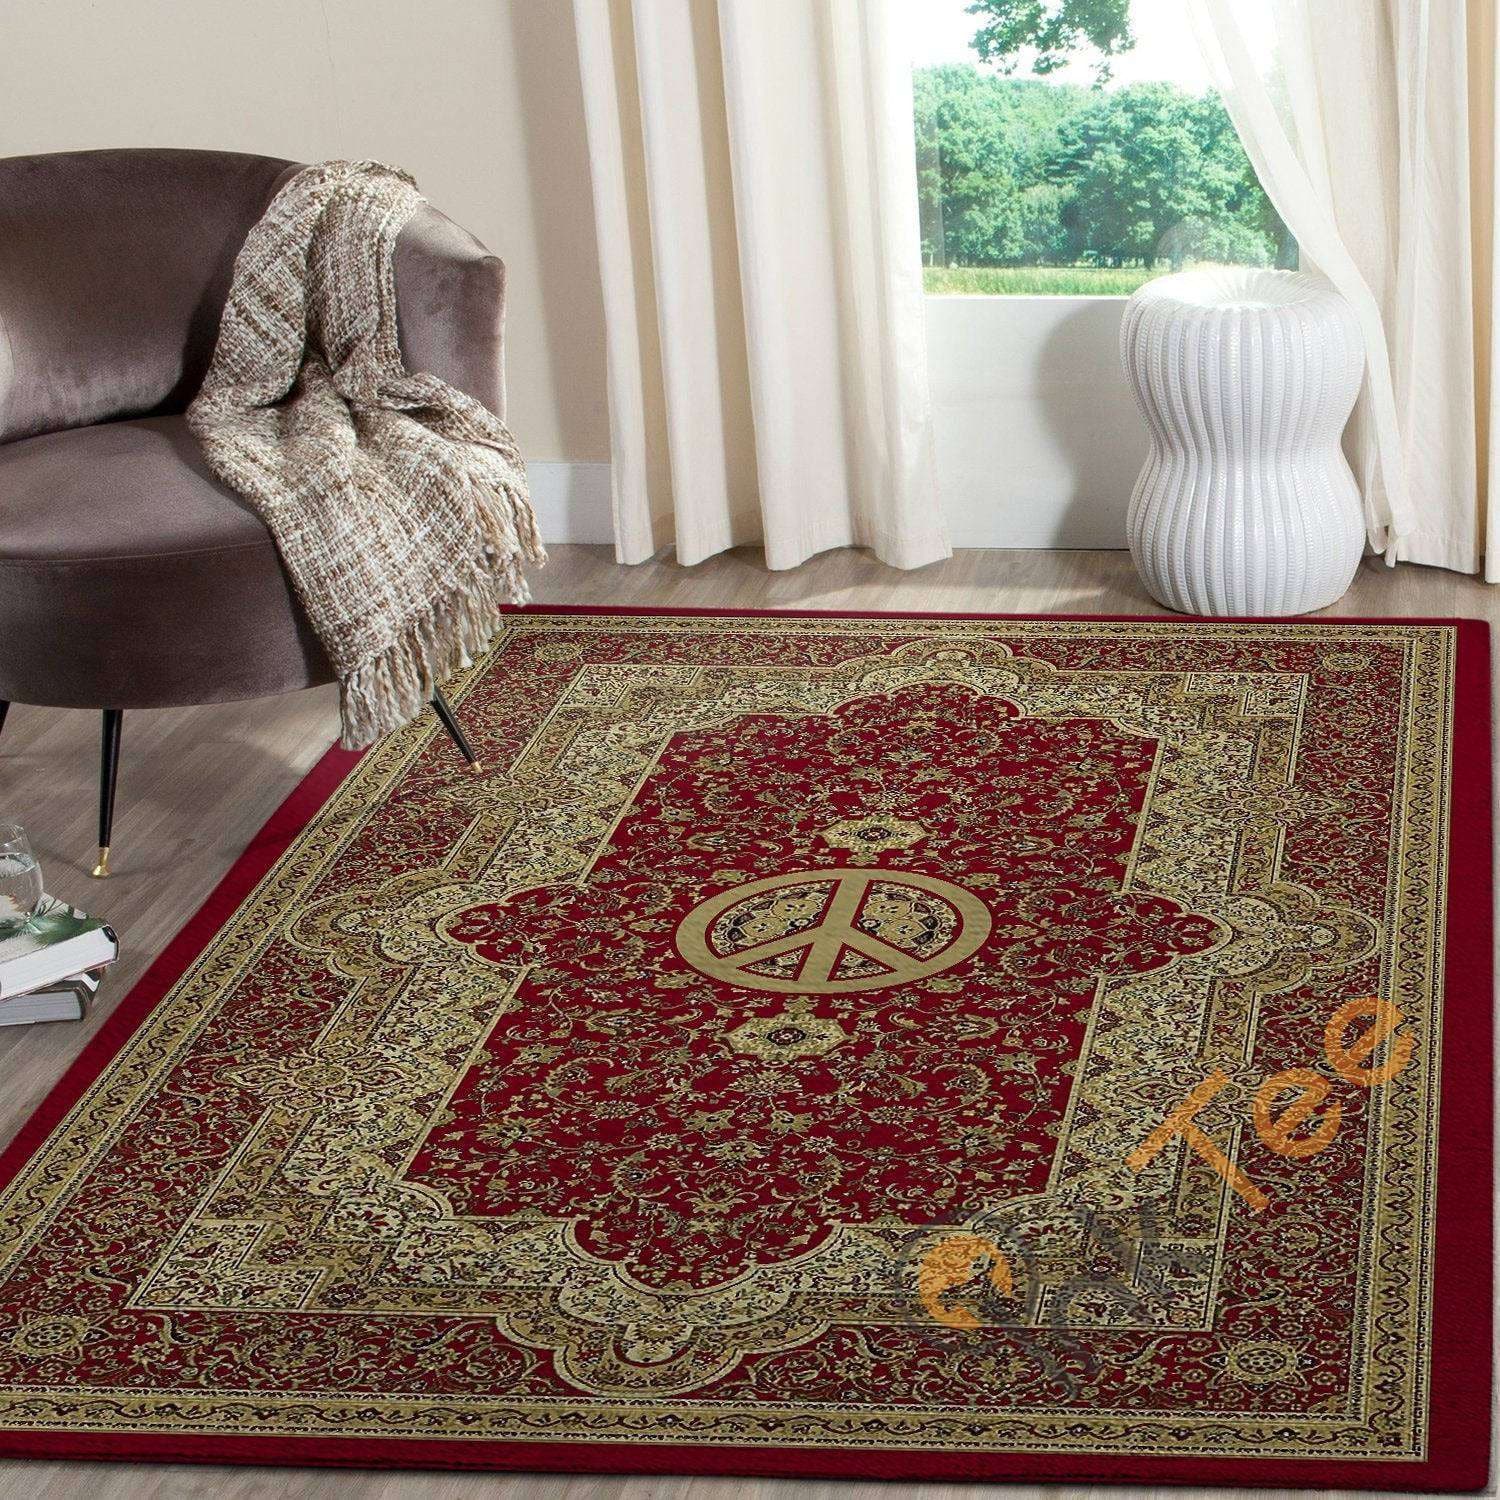 Hippie Peace Sign With Luxurious Pattern Floor Decor Soft Livingroom Bedroom Carpet Highlight For Home Gift Her Rug